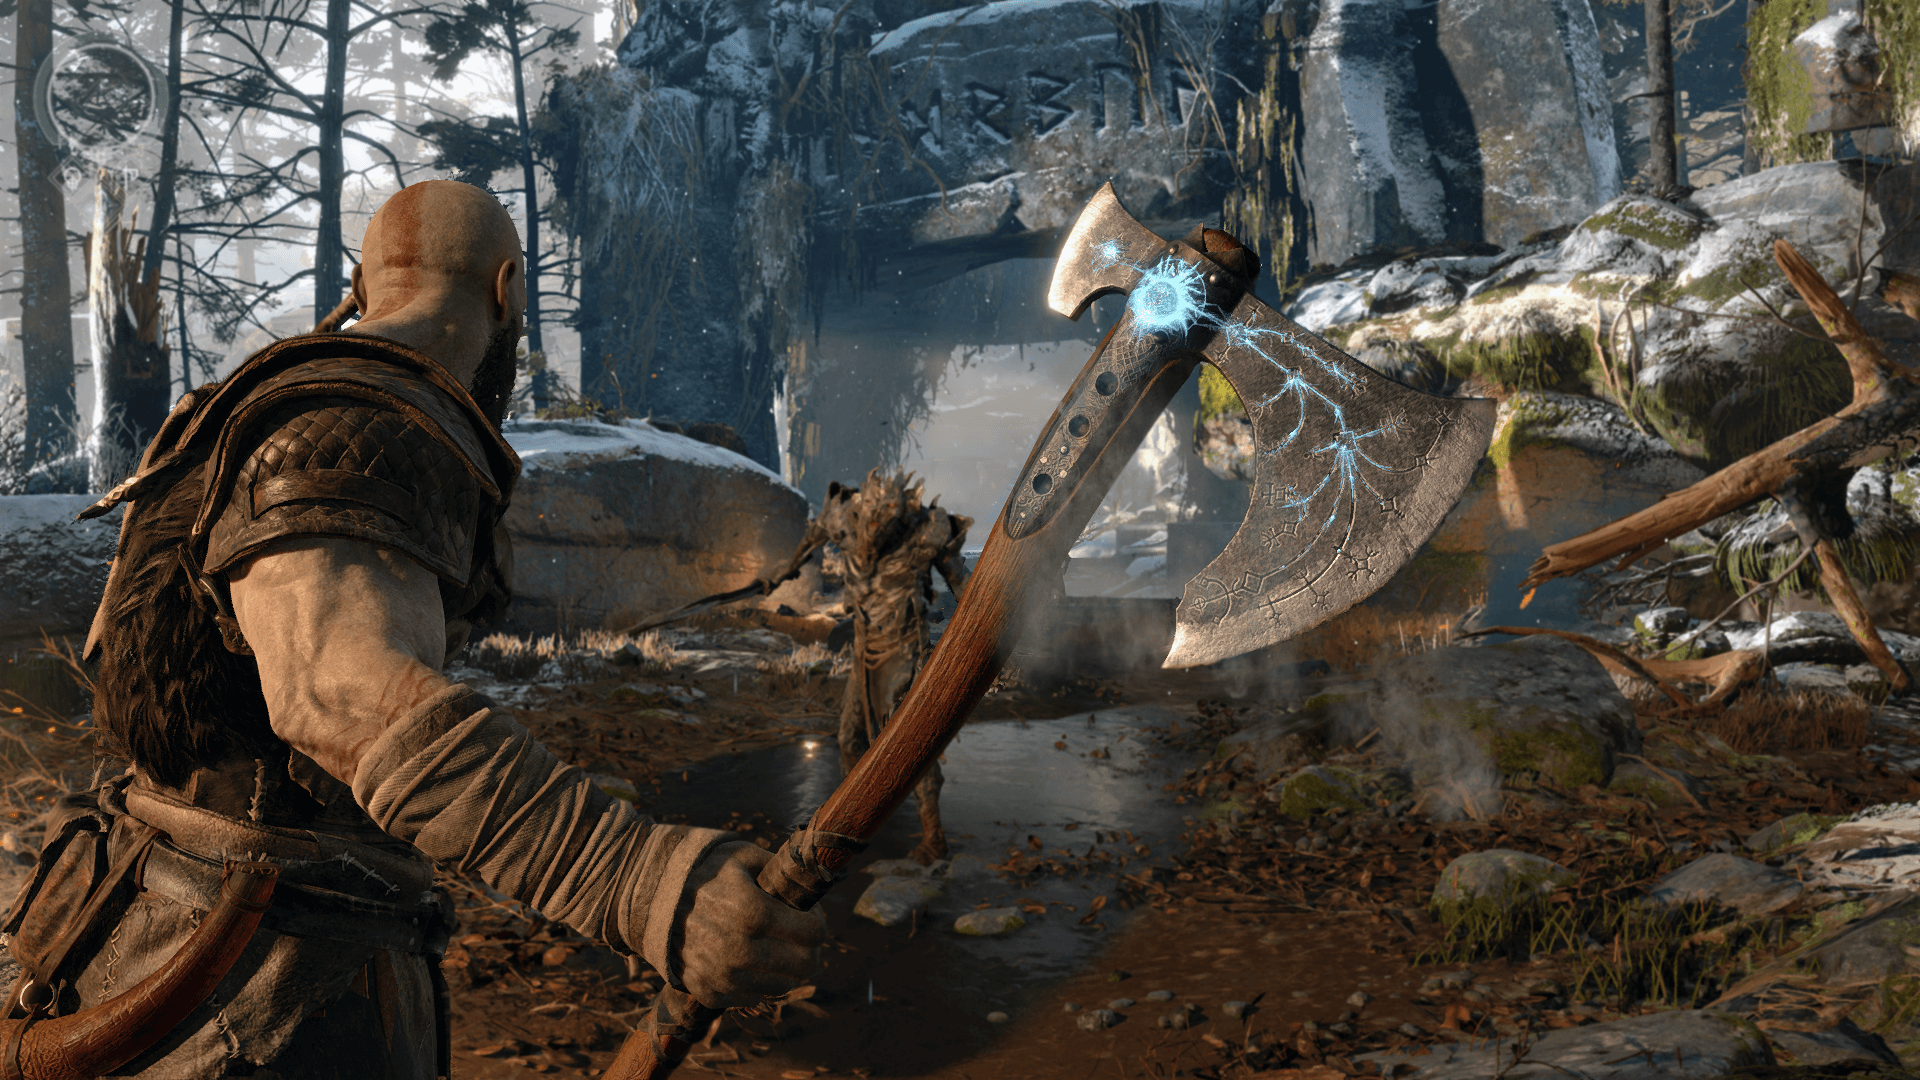 How The Leviathan Axe Will Change GOD OF WAR'S Combat